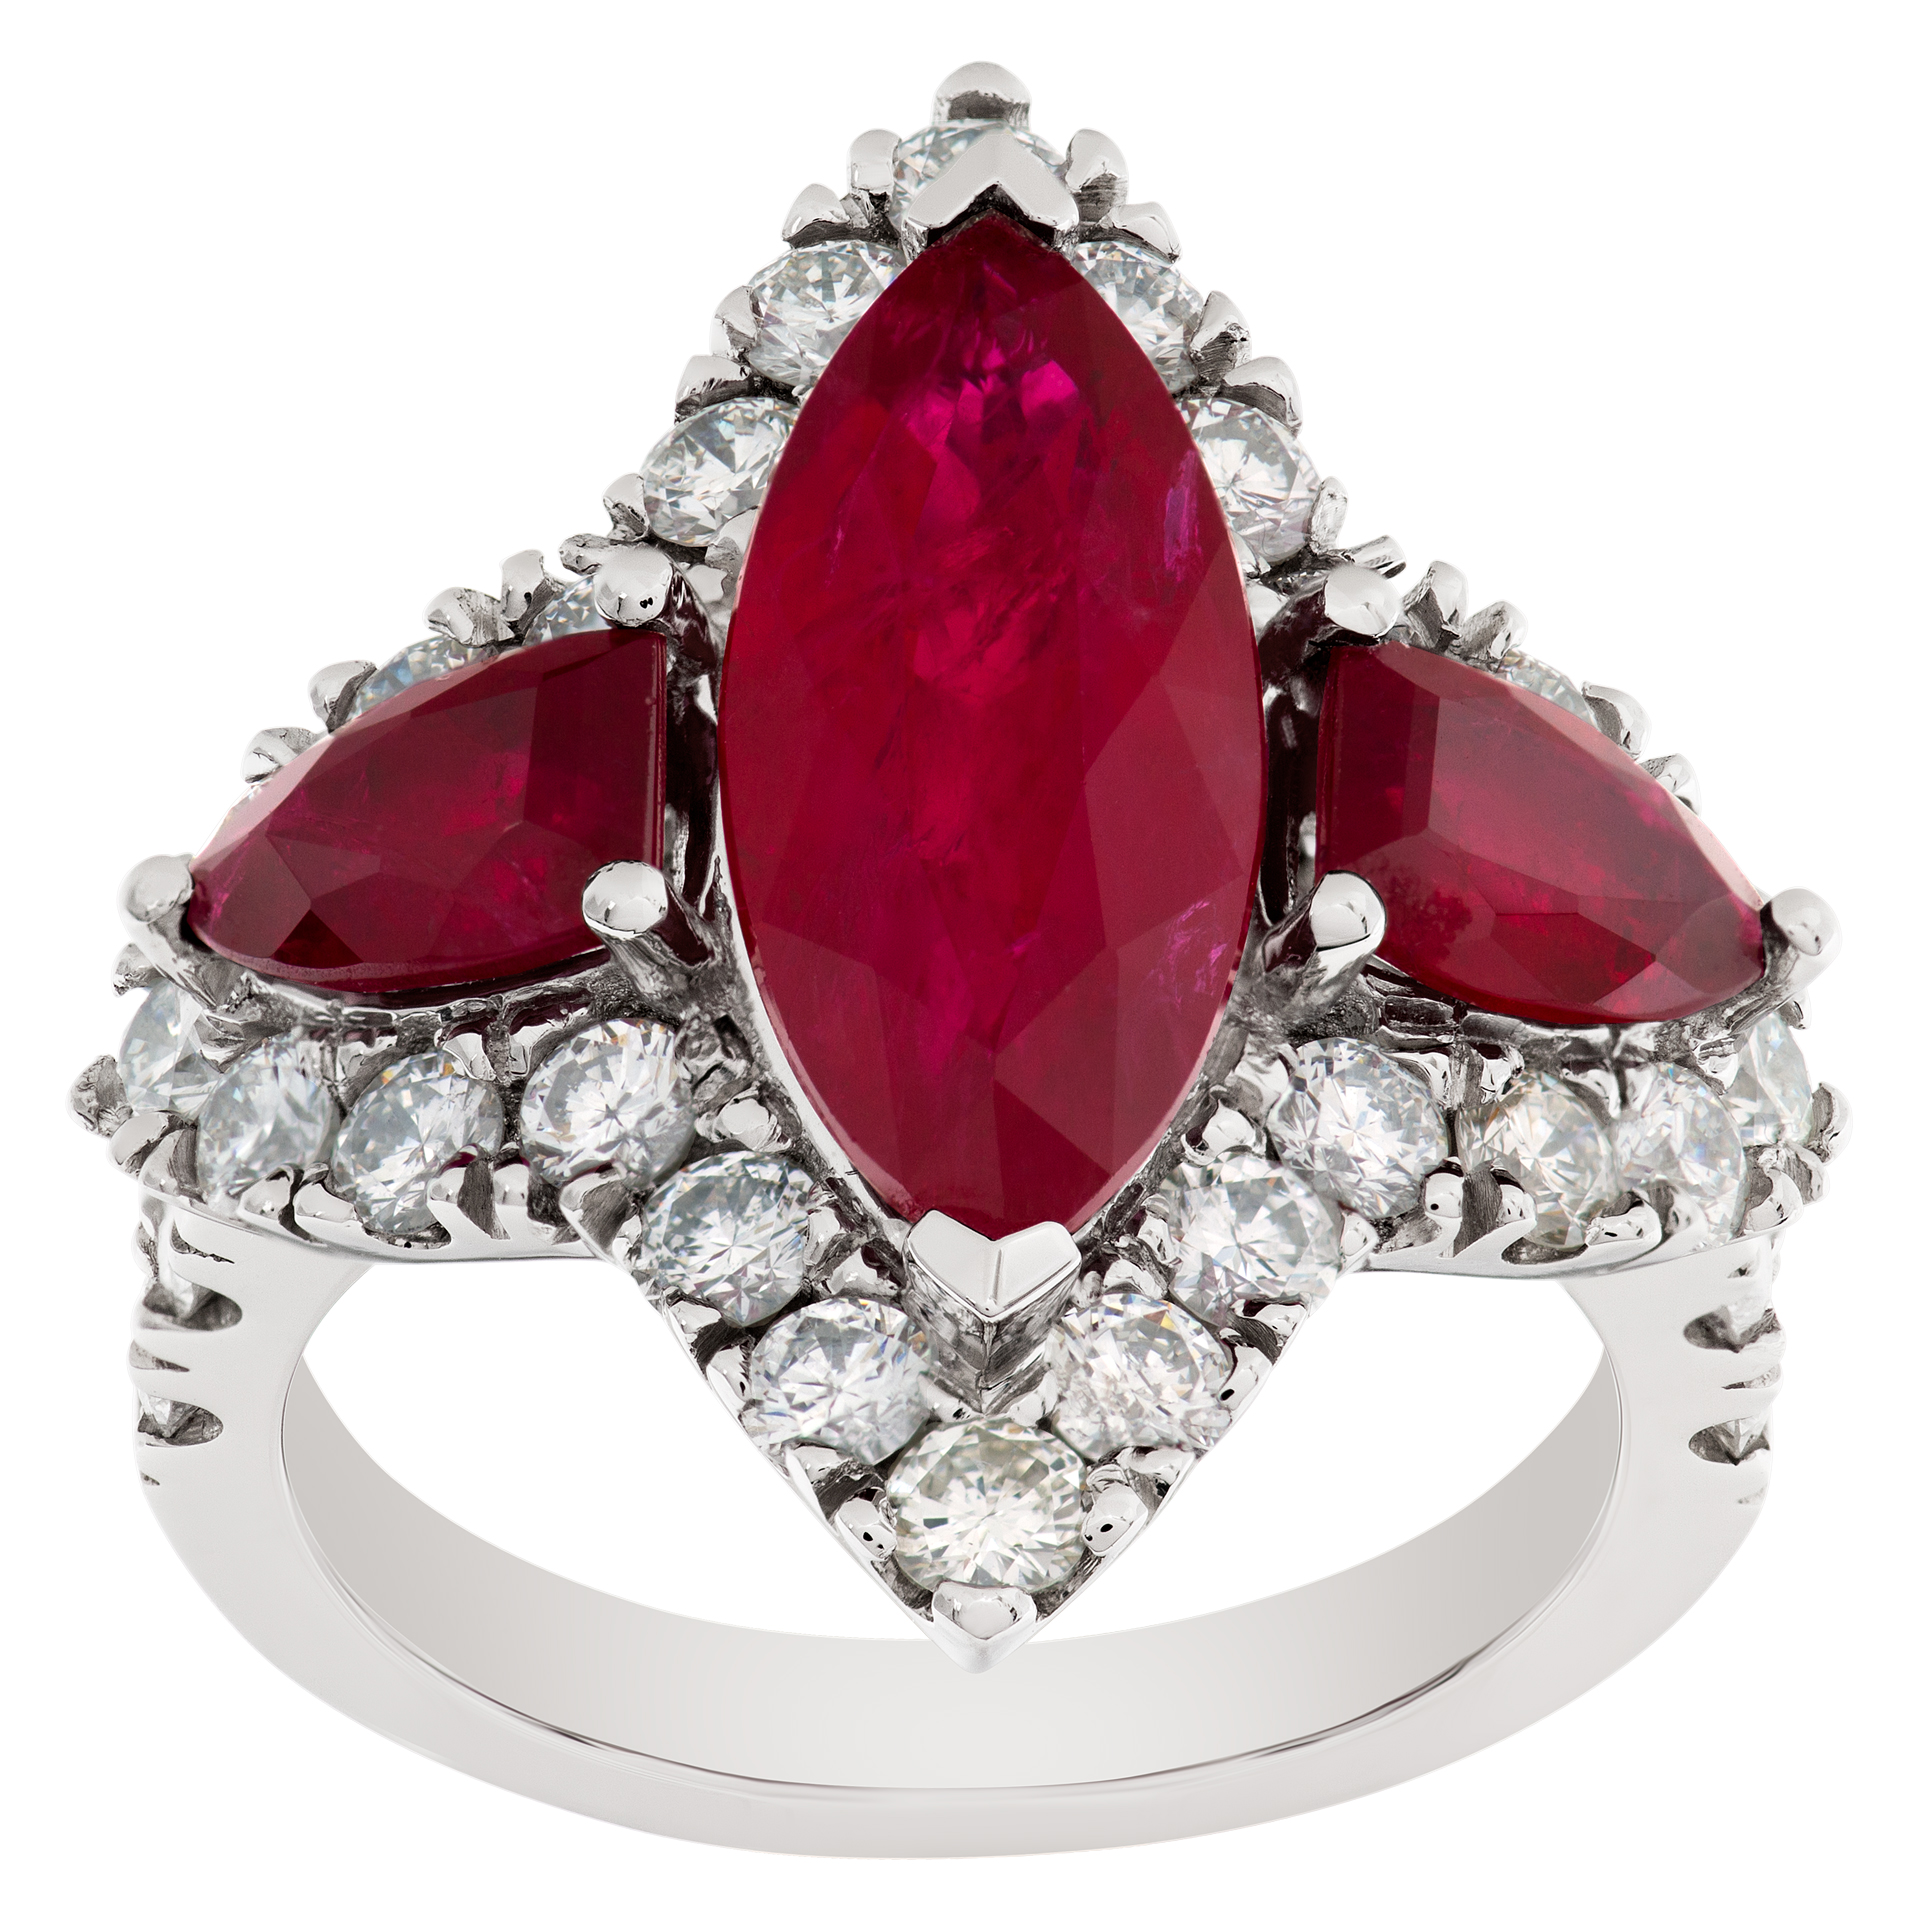 Gorgeous platinum ring with GIA certified 3.51 carat center step cut marquise brilliant Ruby, image 1